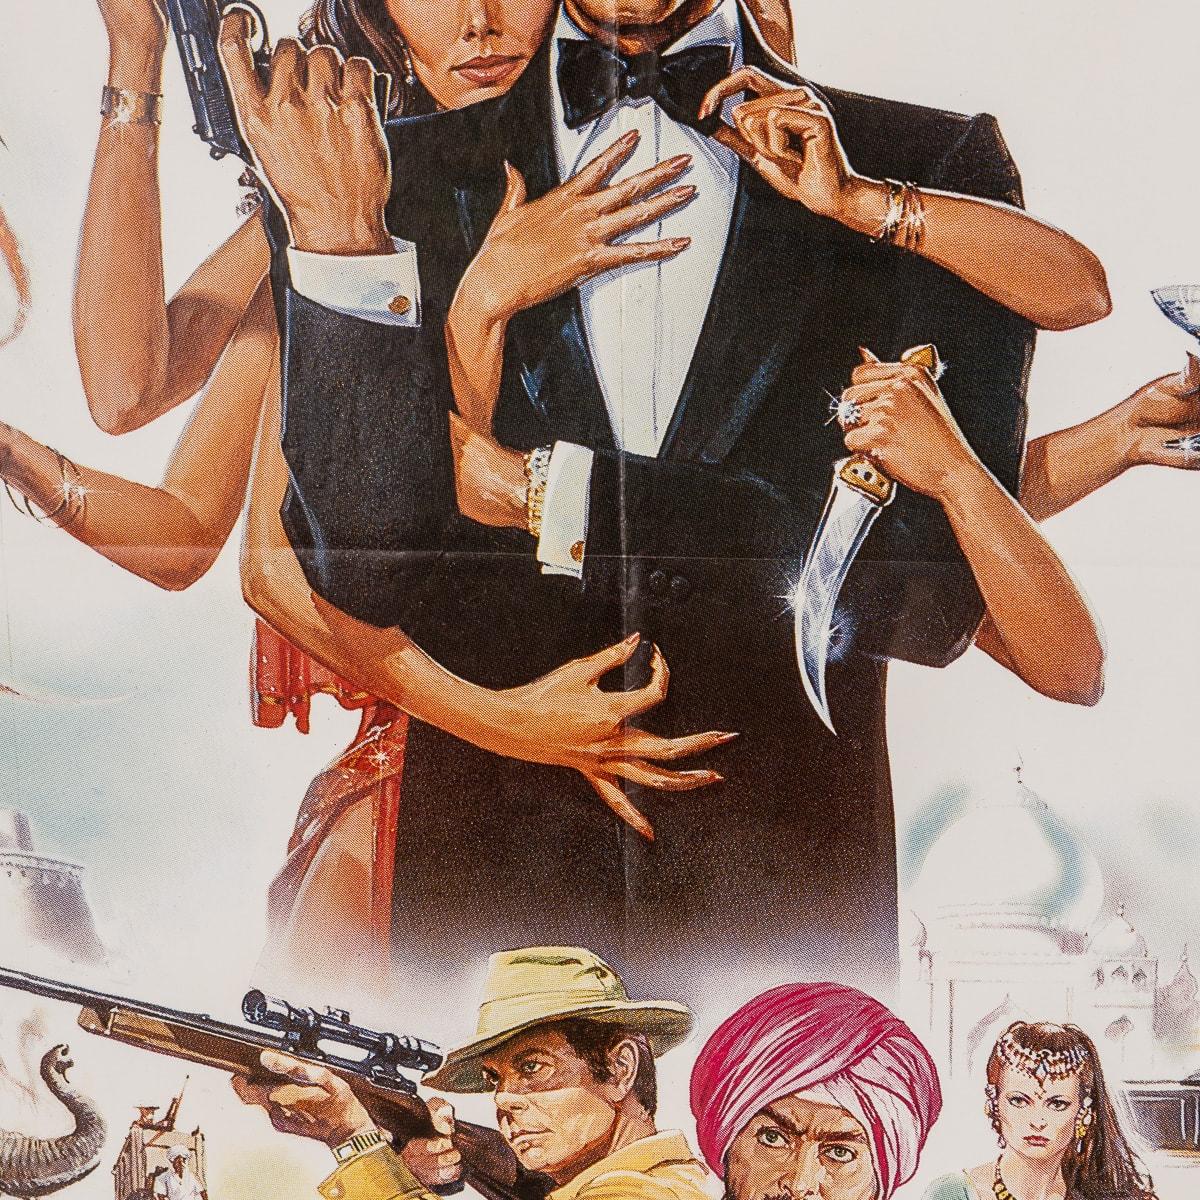 Original French Release James Bond 'Octopussy' Poster, c.1983 For Sale 1